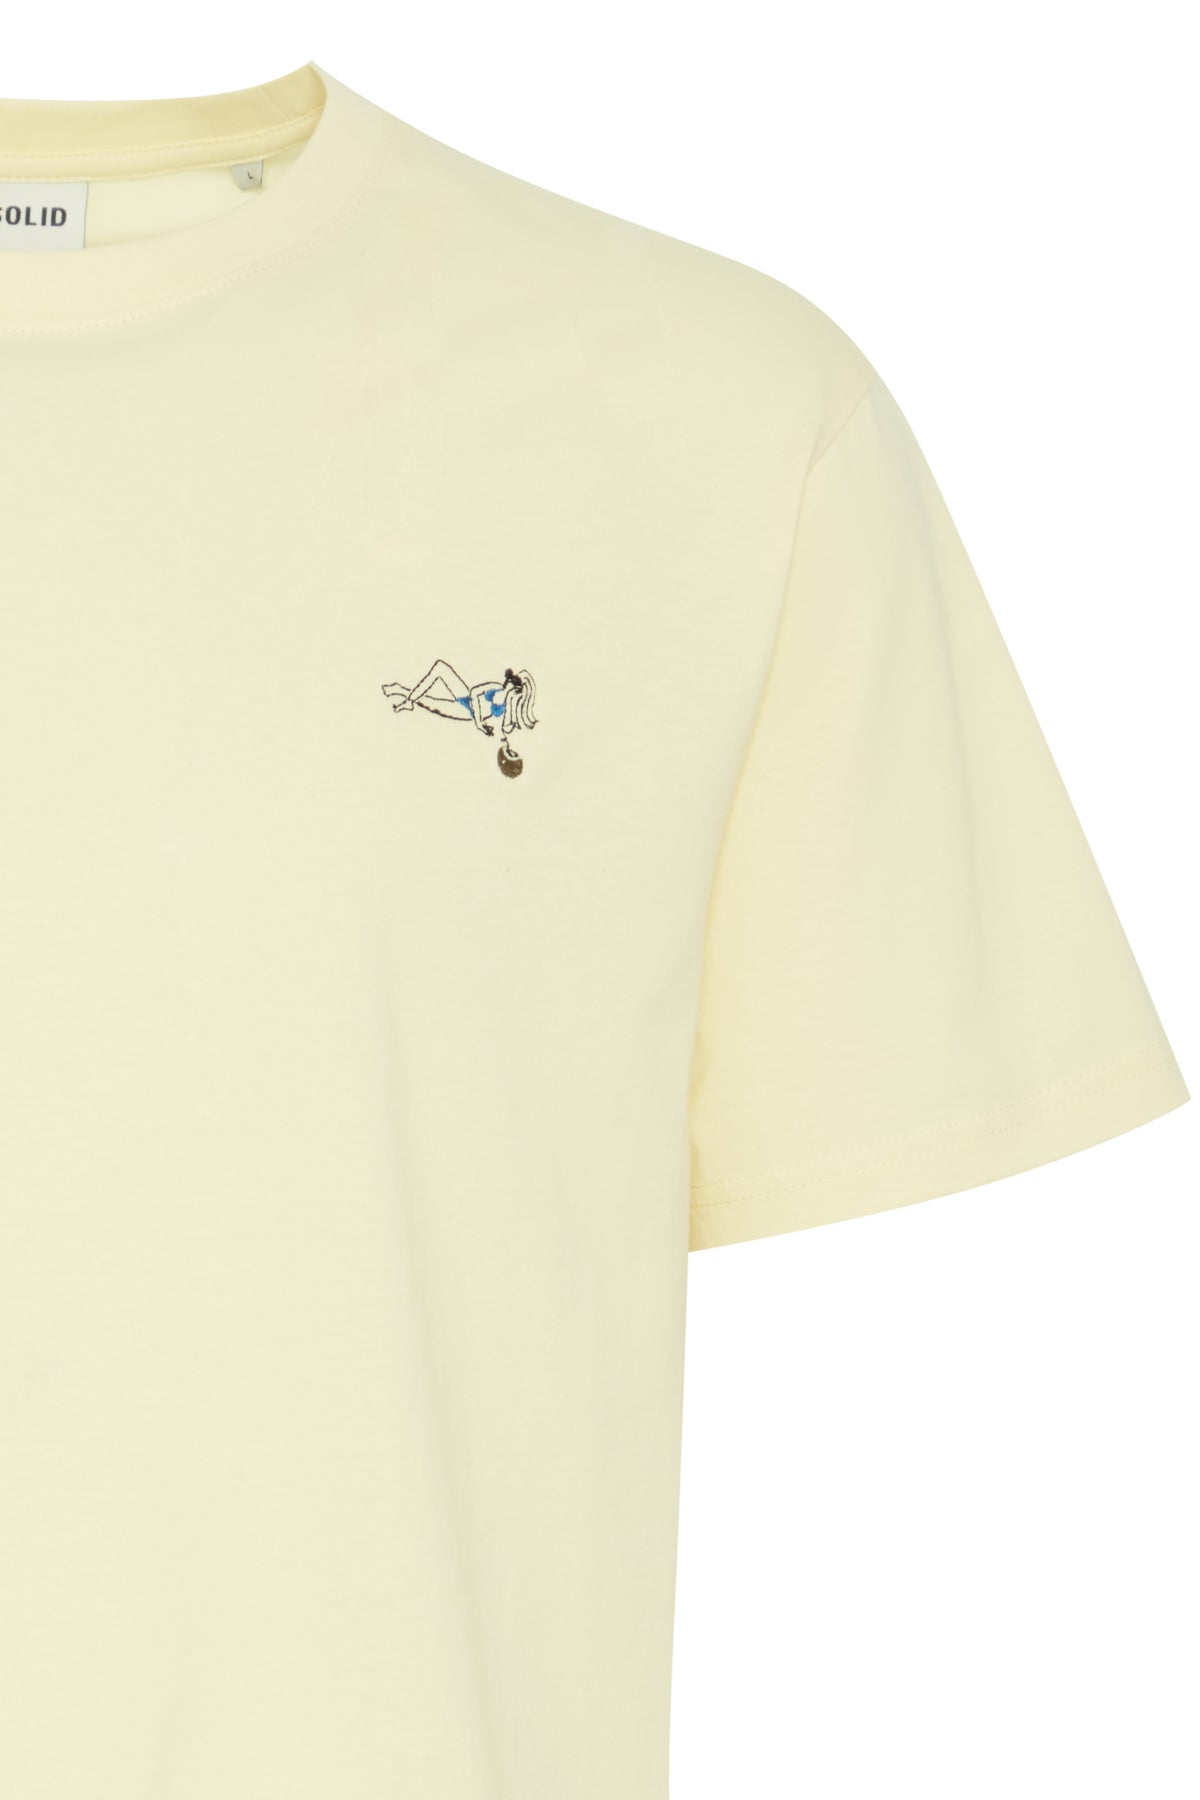 !Solid Ishan Anise Flower T-Shirt